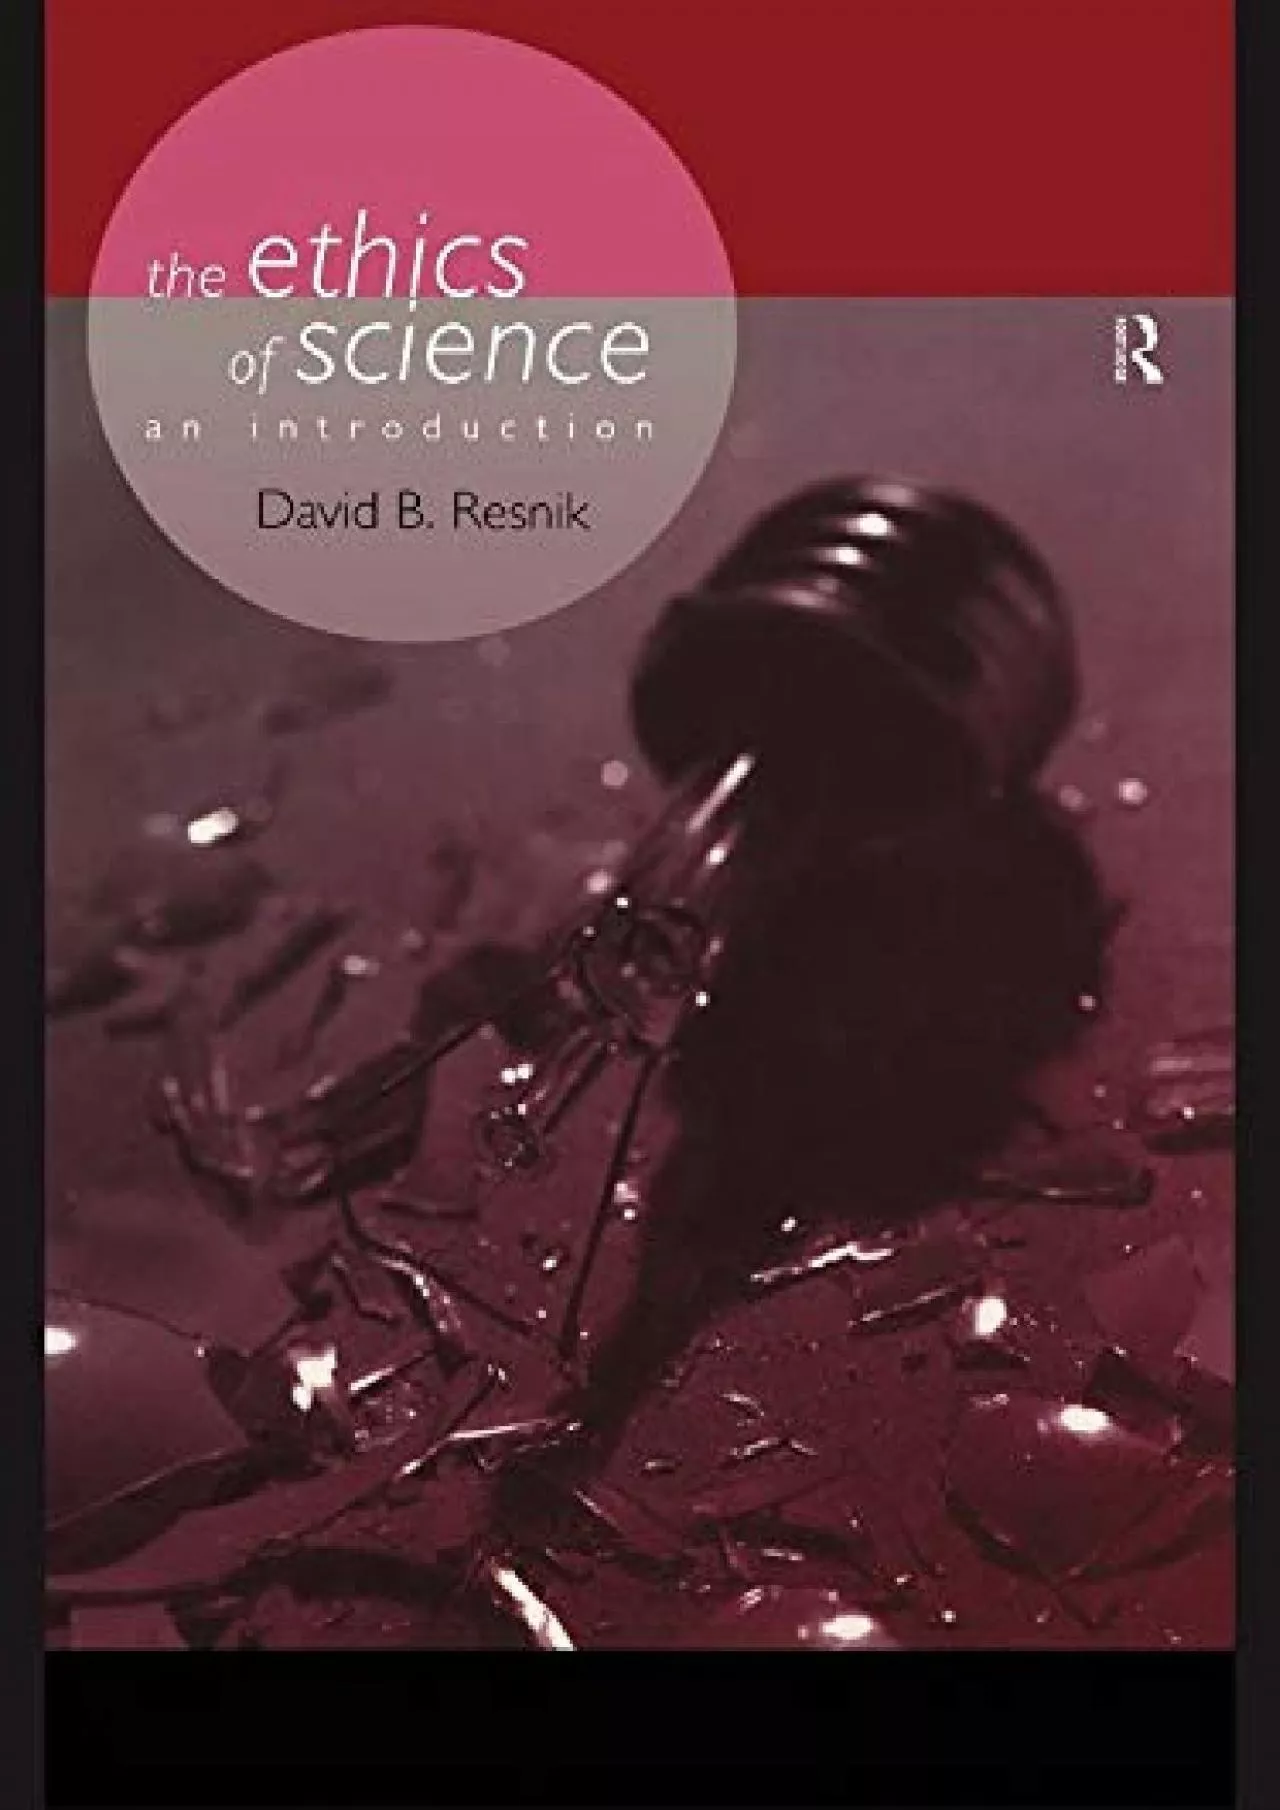 (DOWNLOAD)-The Ethics of Science: An Introduction (Philosophical Issues in Science)